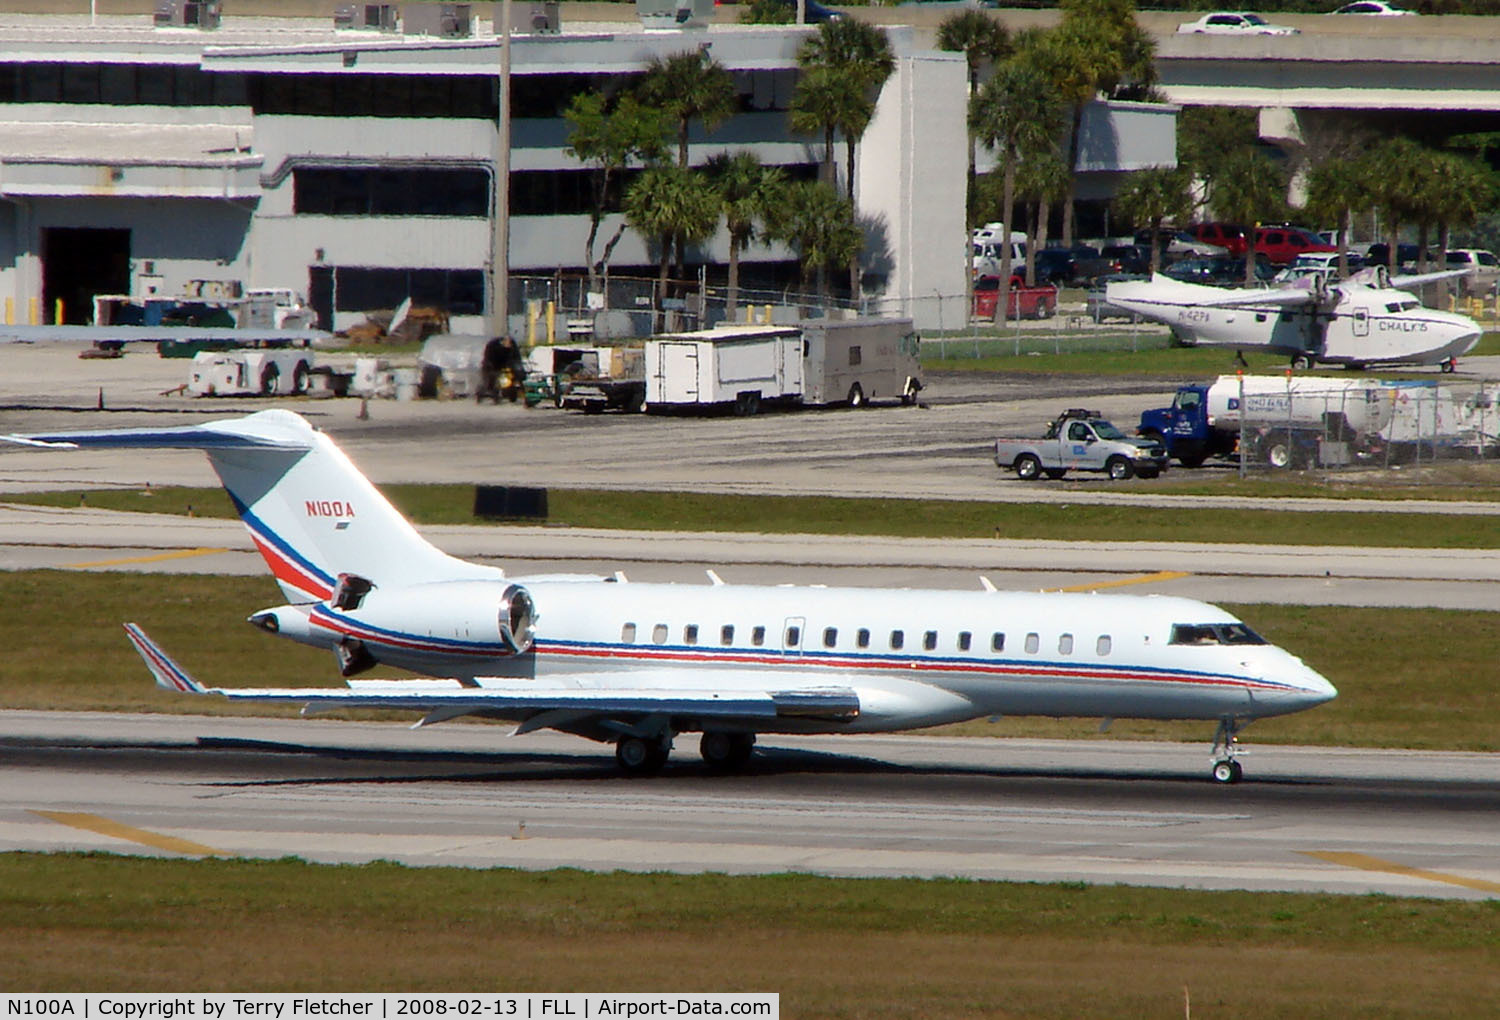 N100A, 2006 Bombardier BD-700-1A10 Global Express C/N 9205, Global Express at Ft.Lauderdale Int during Miami Boat Show Week in Feb 2008